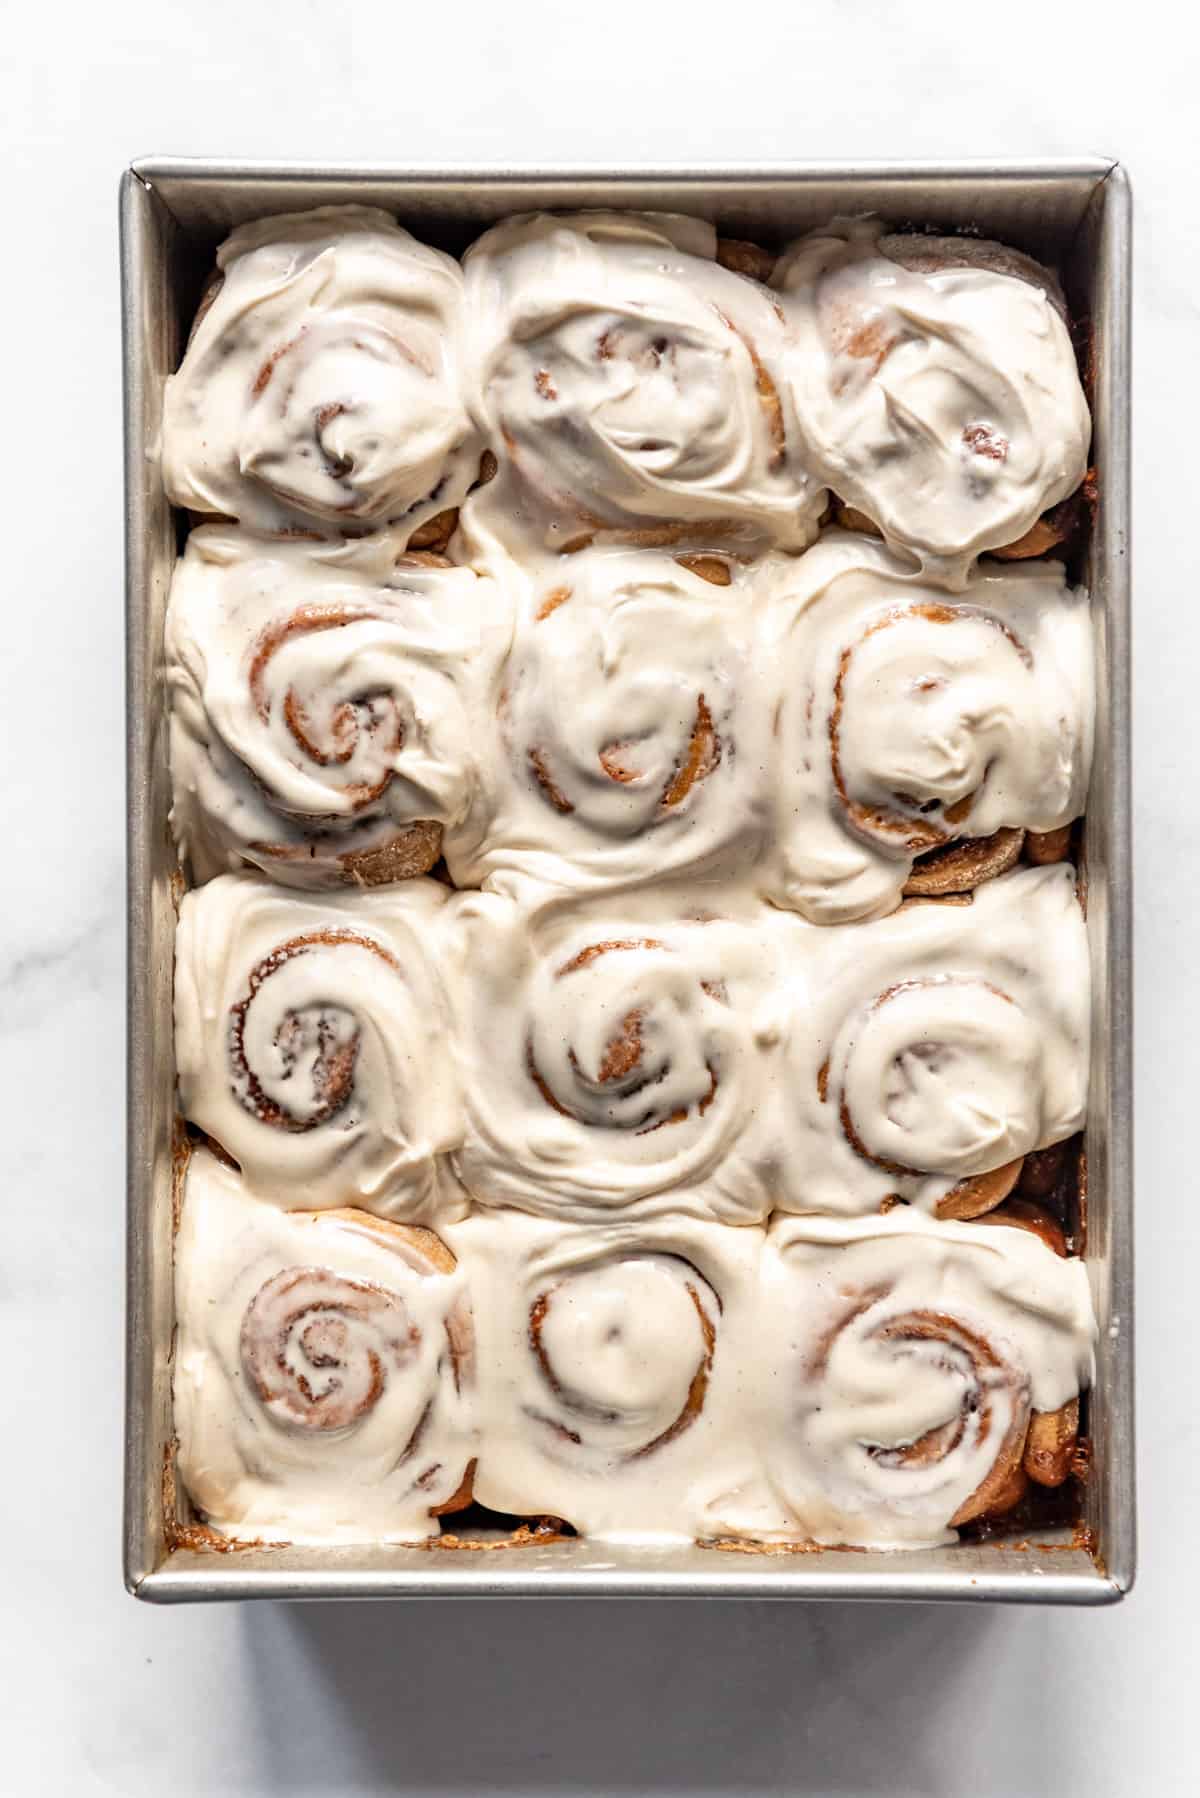 A pan full of homemade cinnamon rolls topped with cinnamon cream cheese frosting.